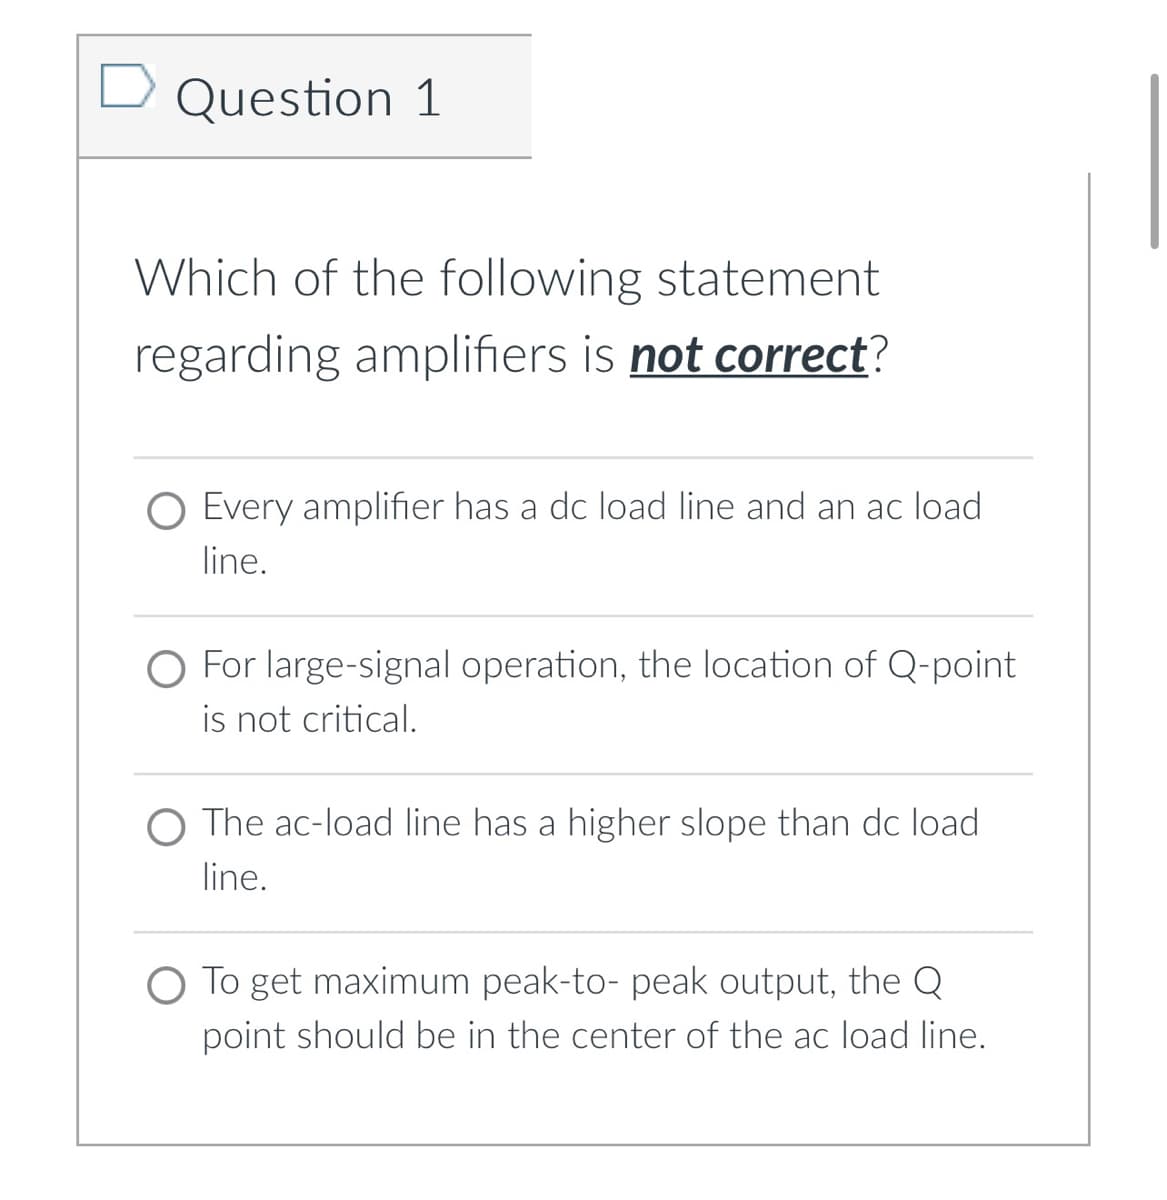 Question 1
Which of the following statement
regarding amplifiers is not correct?
O Every amplifier has a dc load line and an ac load
line.
O For large-signal operation, the location of Q-point
is not critical.
O The ac-load line has a higher slope than dc load
line.
To get maximum peak-to- peak output, the Q
point should be in the center of the ac load line.
